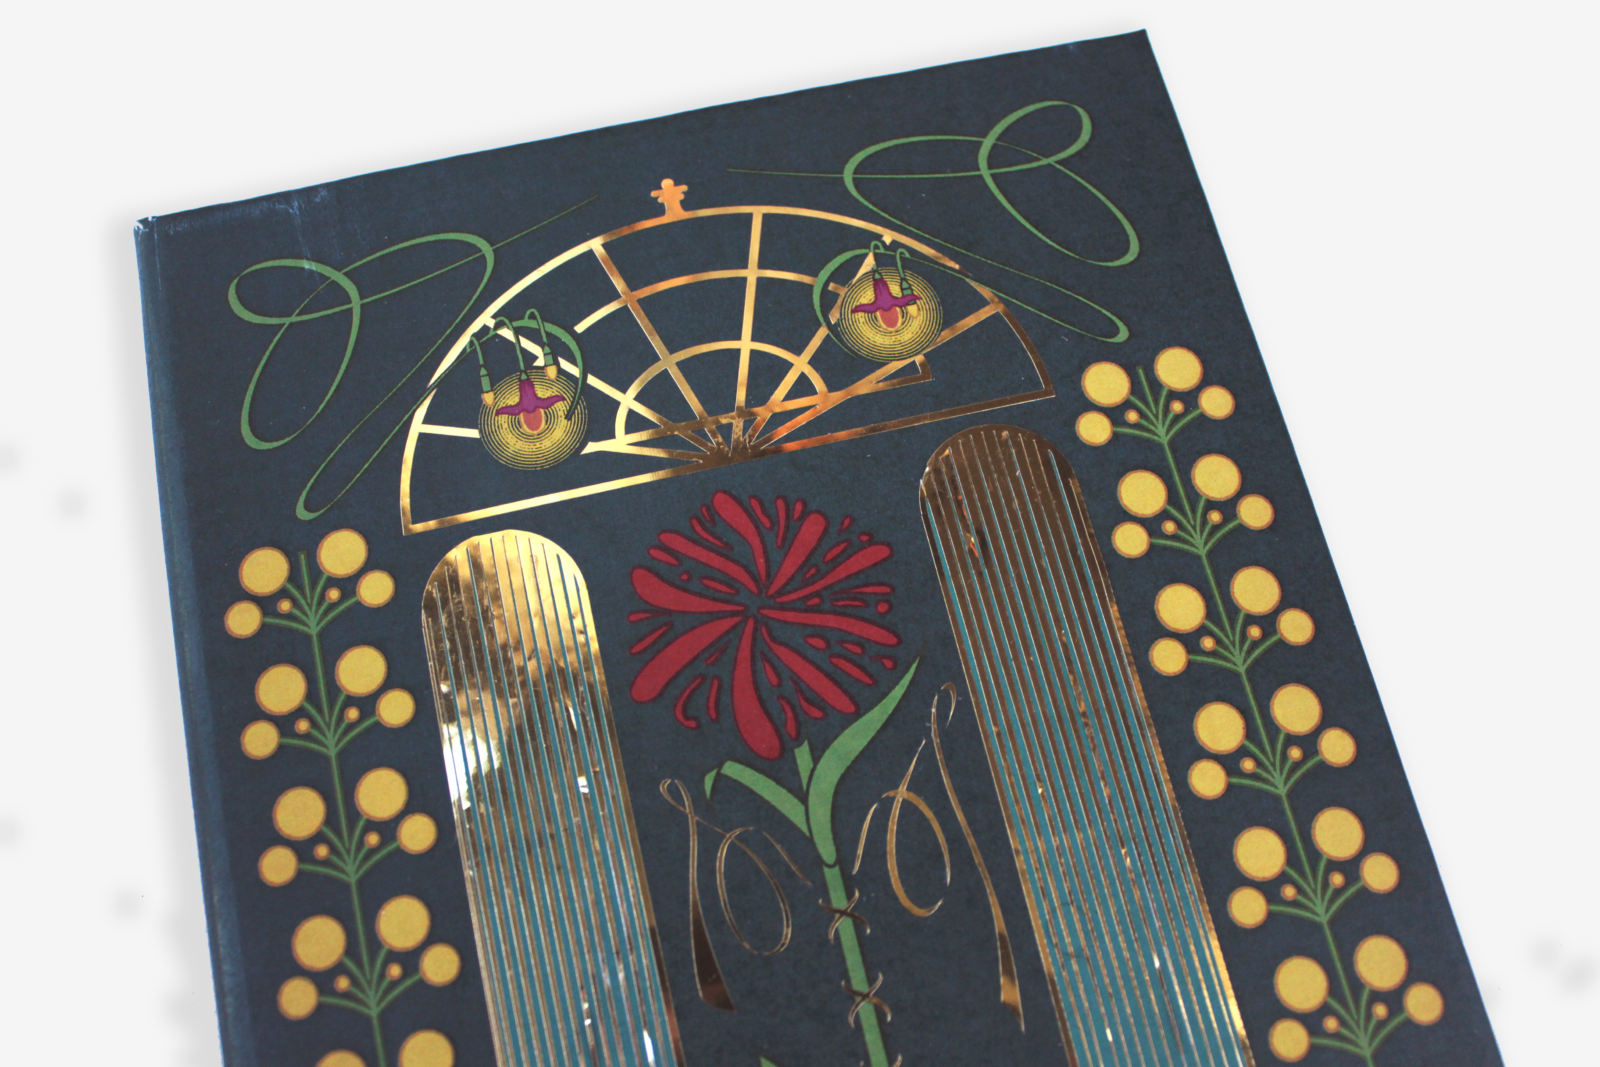 Image of a deep blue notebook with art nouveau inspired designs and gold foil on the cover.